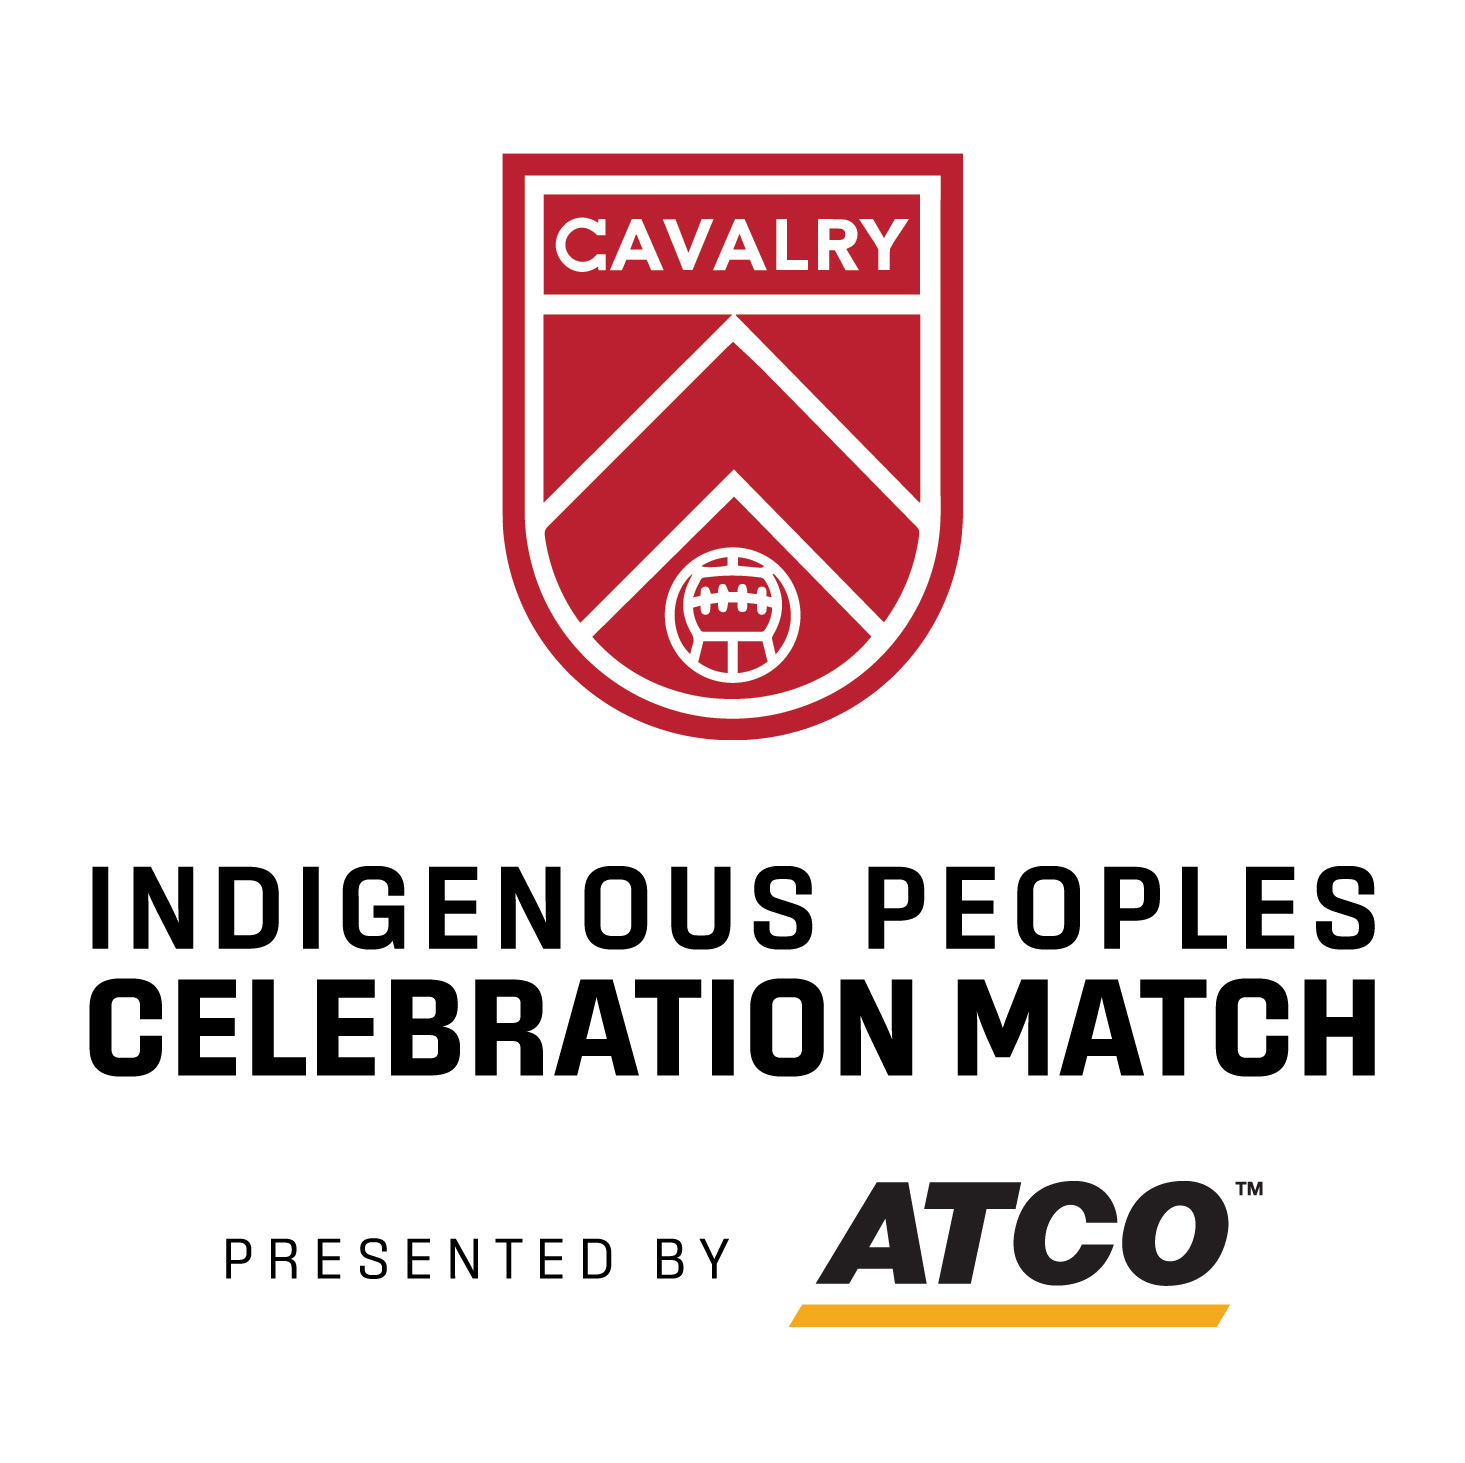 Cavalry Indigenous Peoples Celebration Match - Presented by ATCO